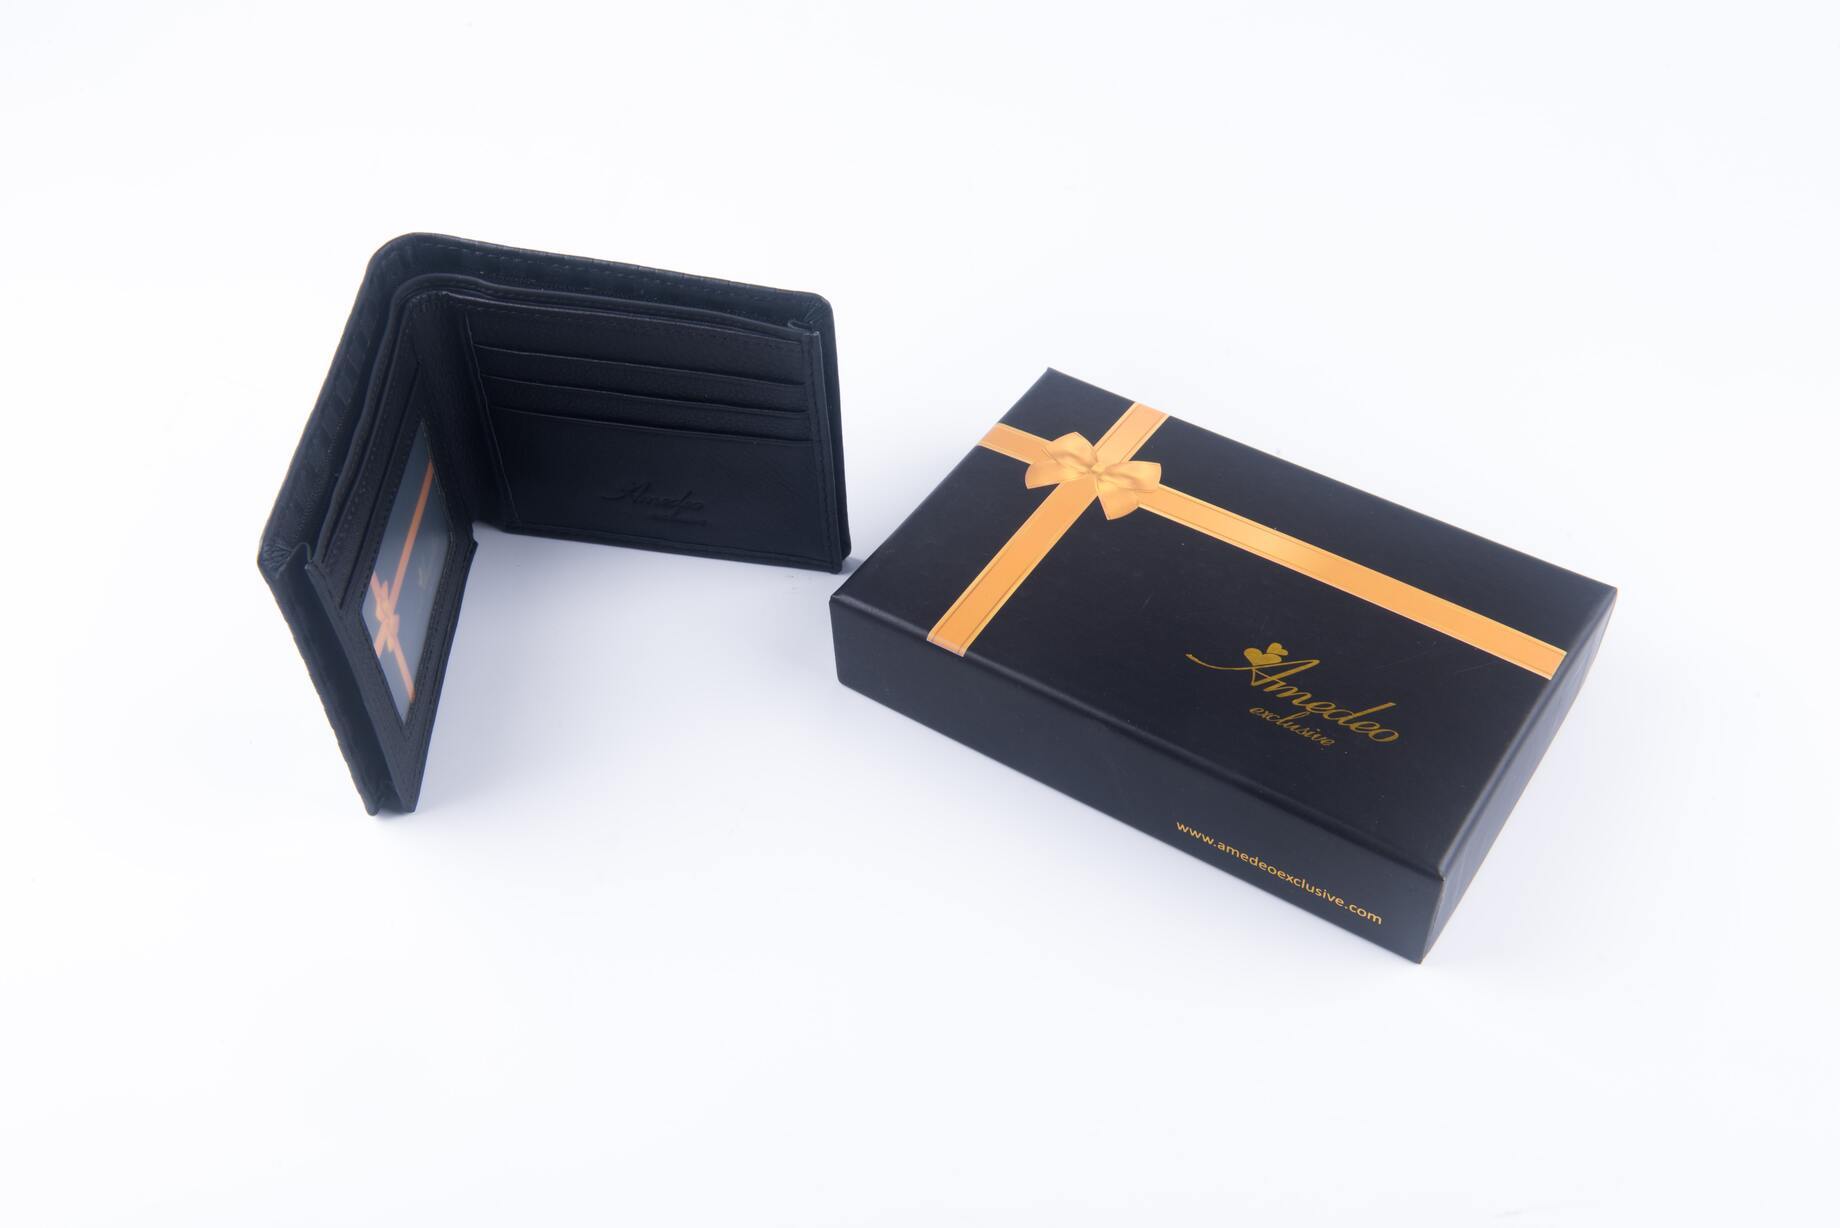 Leather Wallets Black4 -AMLW-0008 - Amedeo Exclusive